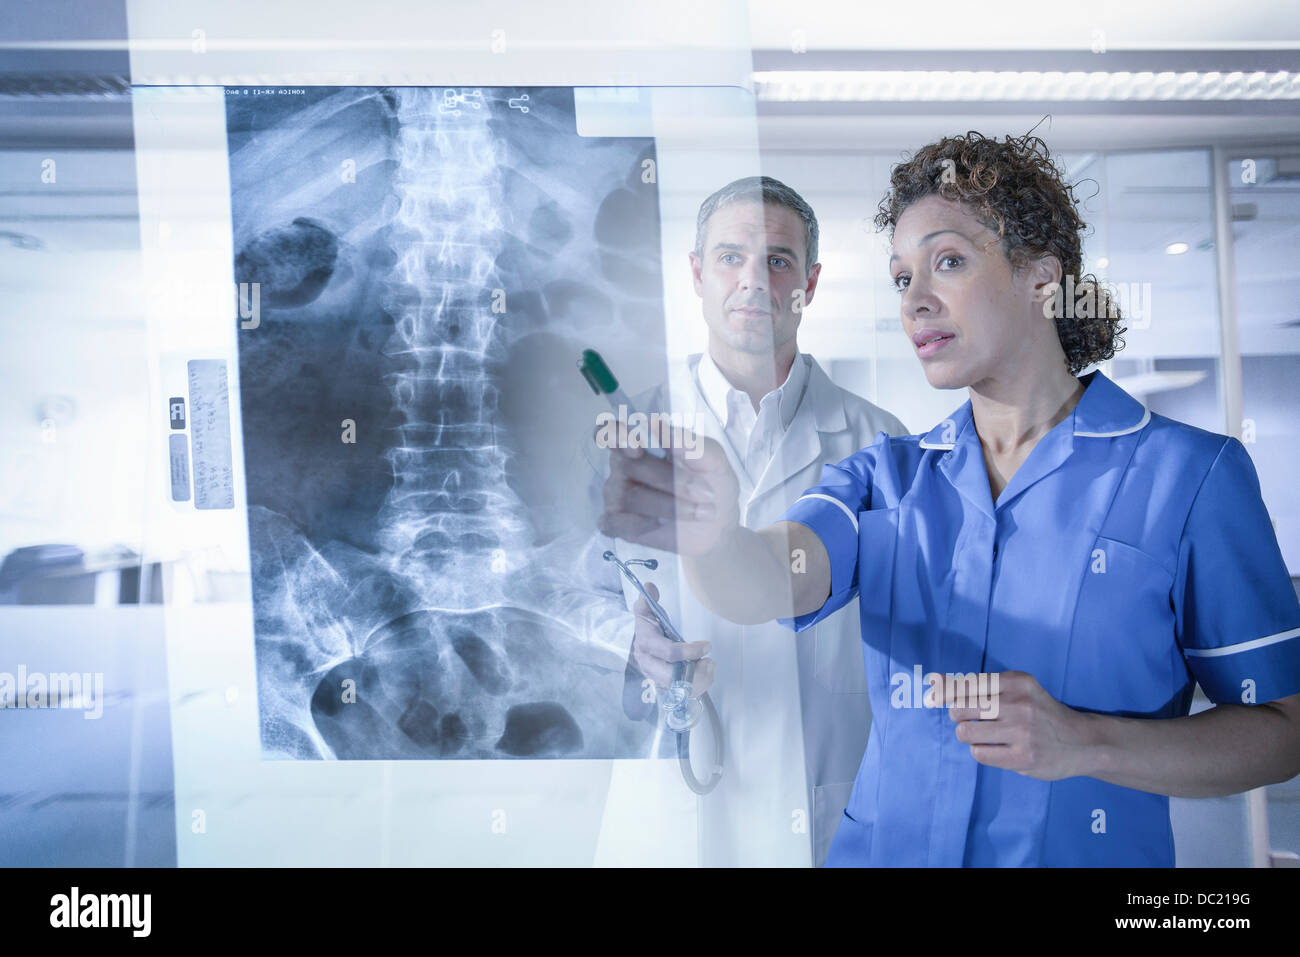 Doctor and nurse looking at xray results displayed on screen Stock Photo